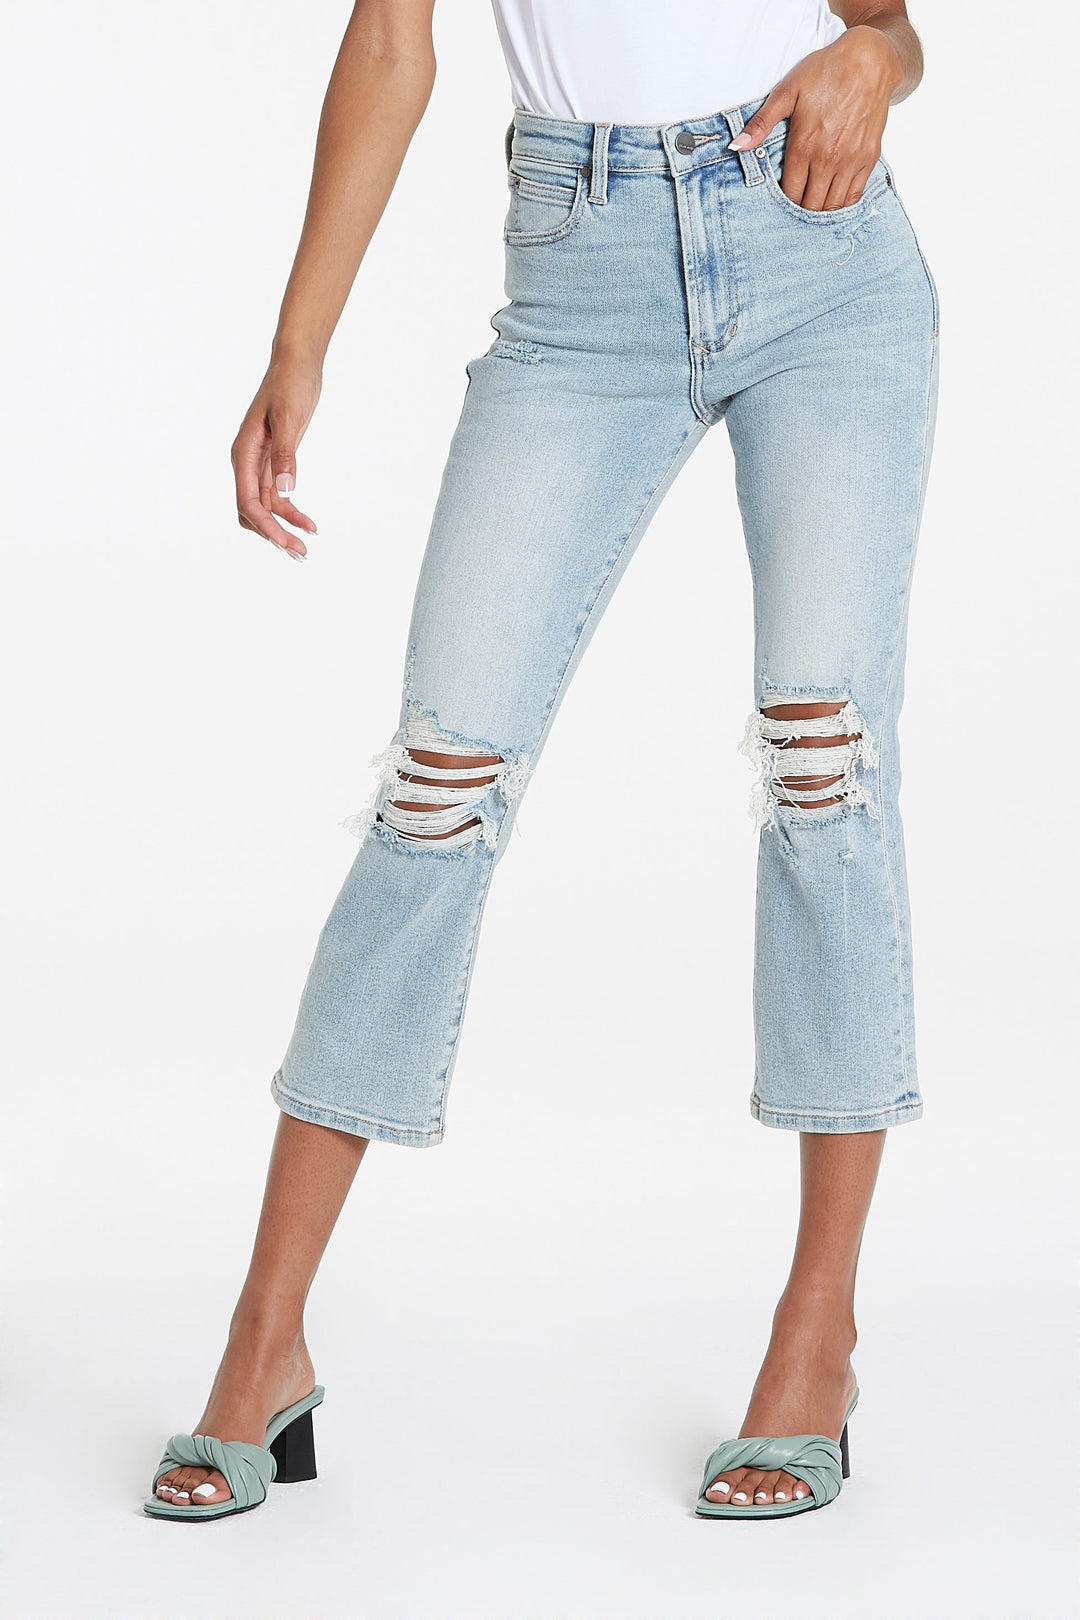 image of a female model wearing a FRANKIE SUPER HIGH RISE CROPPED STRAIGHT MONTPELIER JEANS JEANS